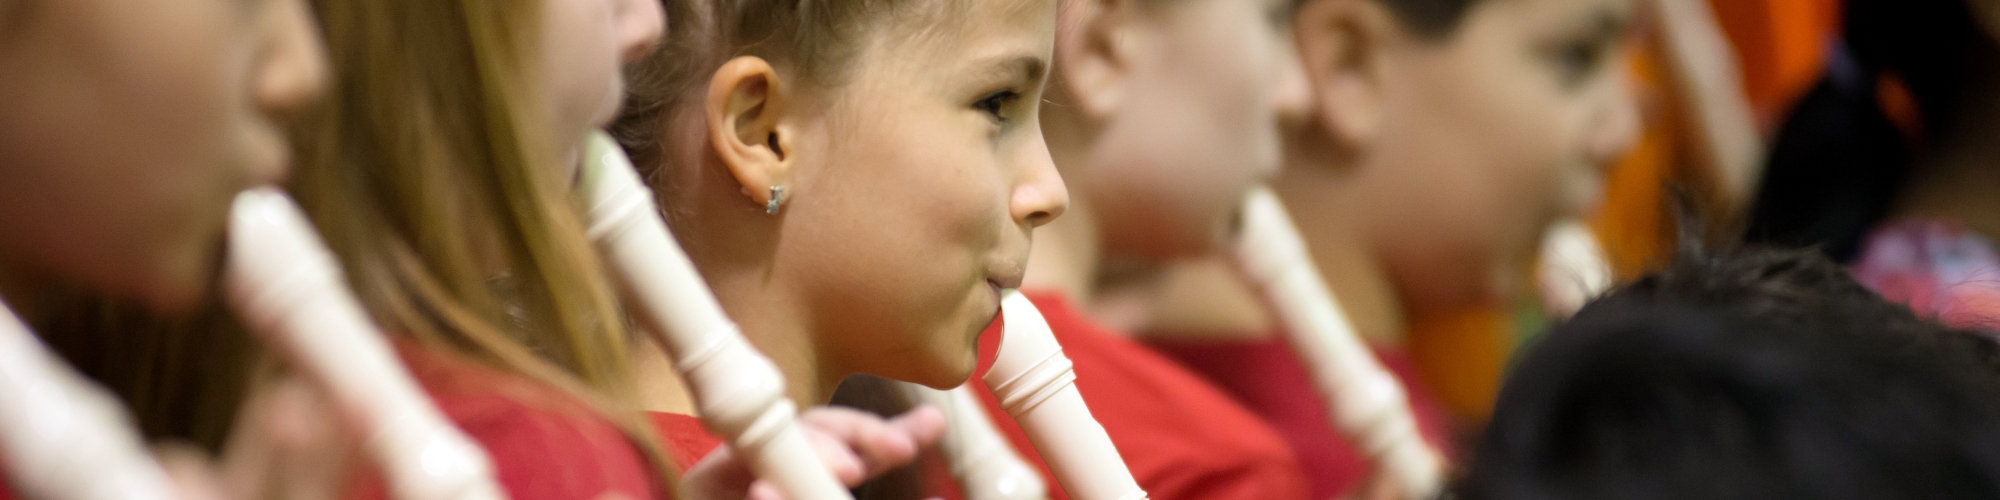 Elementary school students playing recorders.